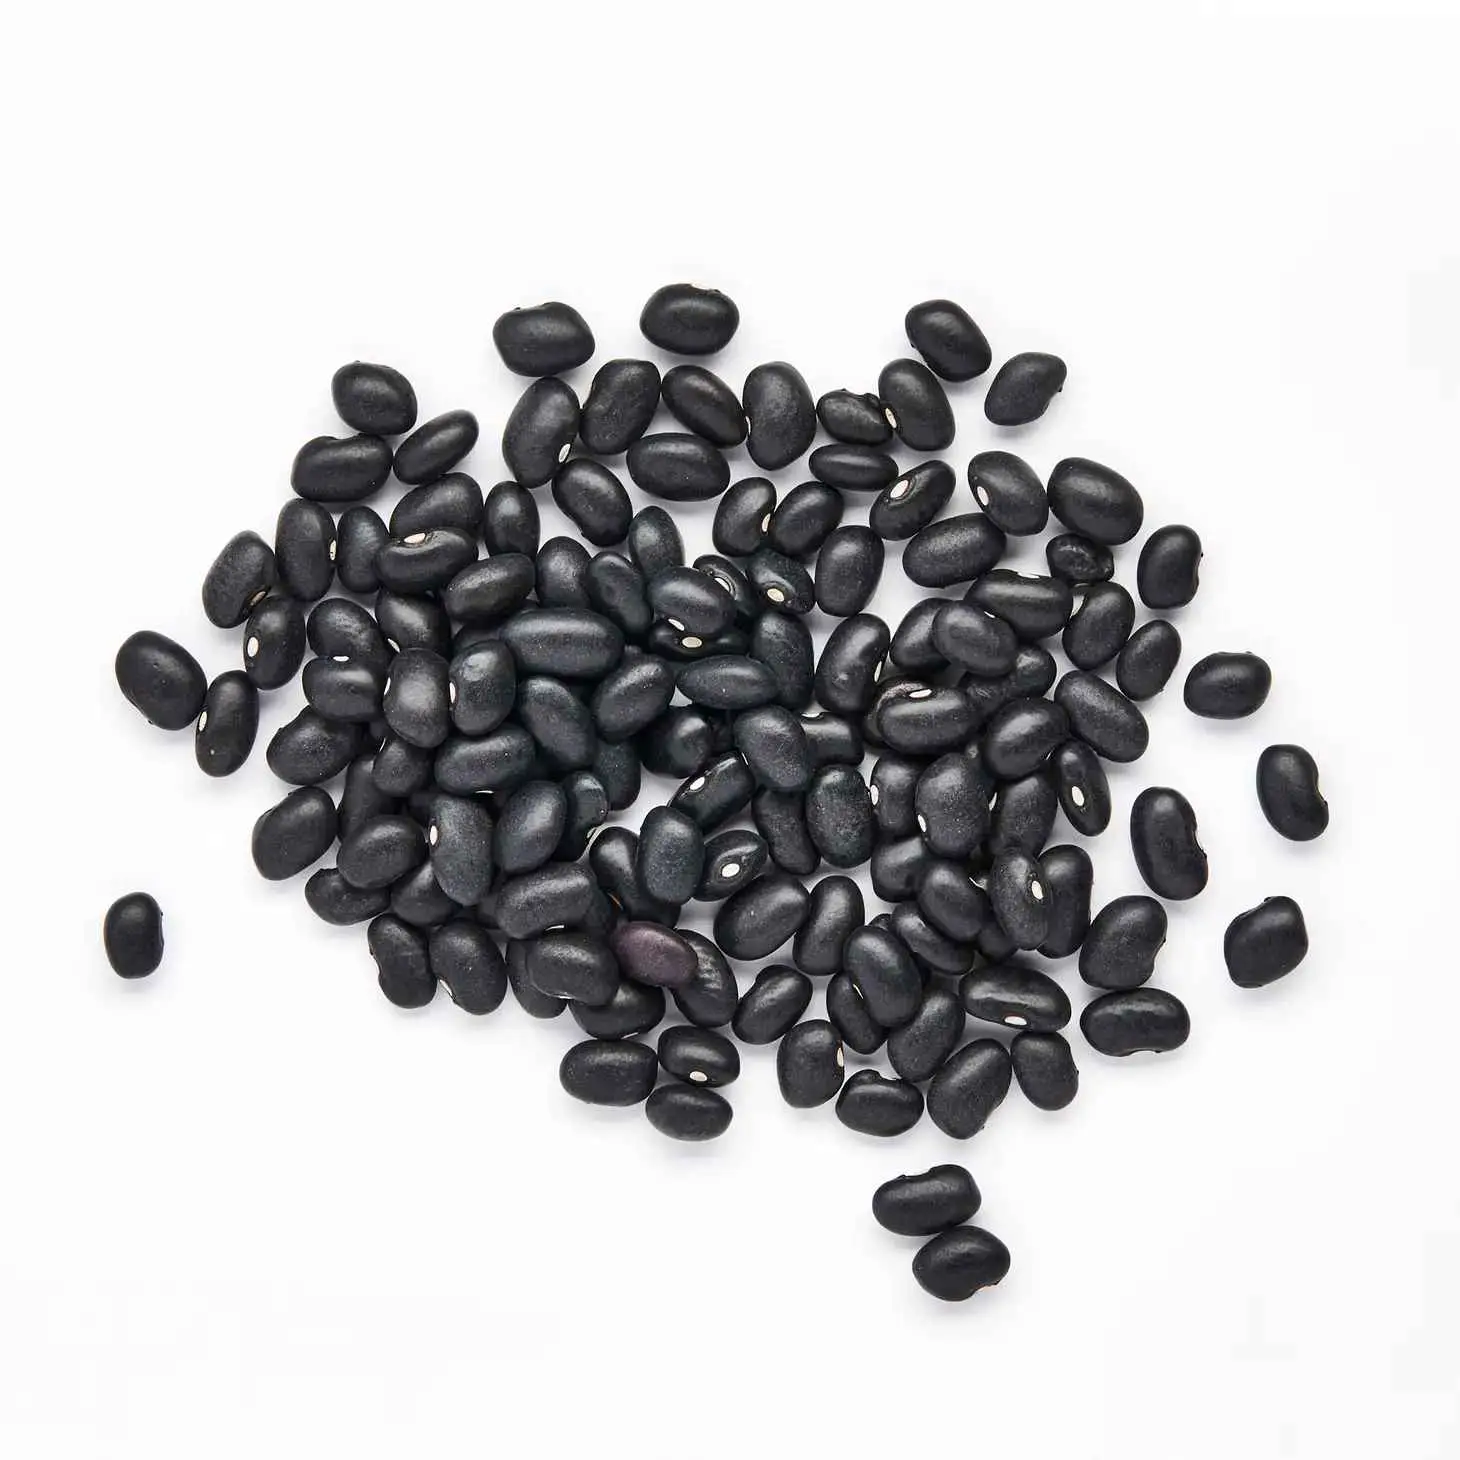 Heirloom Chatino Black Beans Delivery